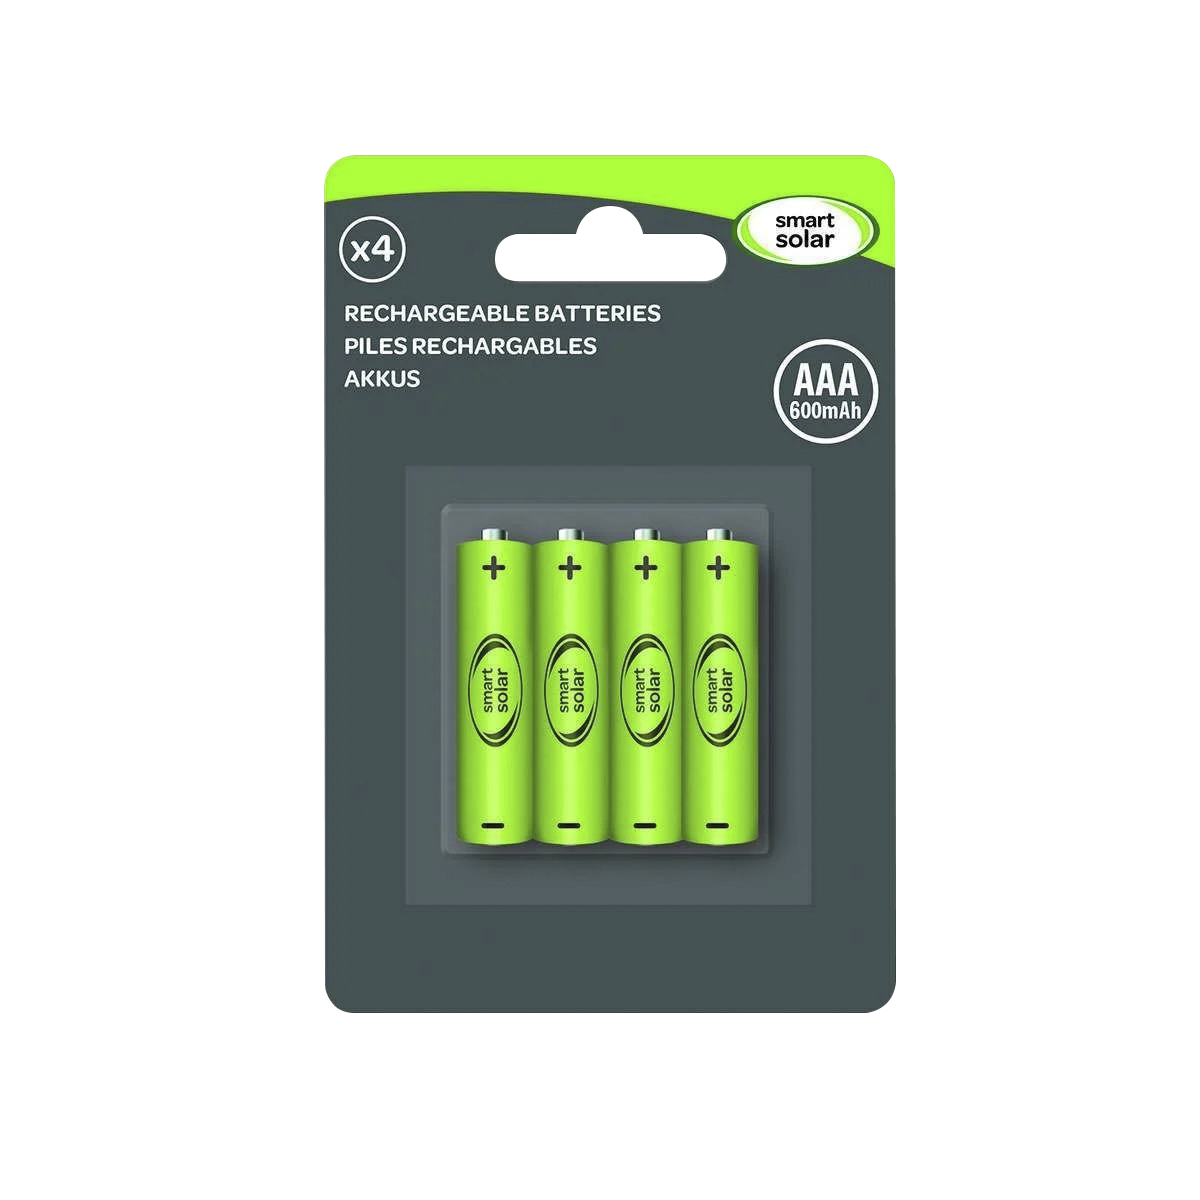 Solar Rechargeable Batteries, AAA, 600 mAh, 4 Pack image 1